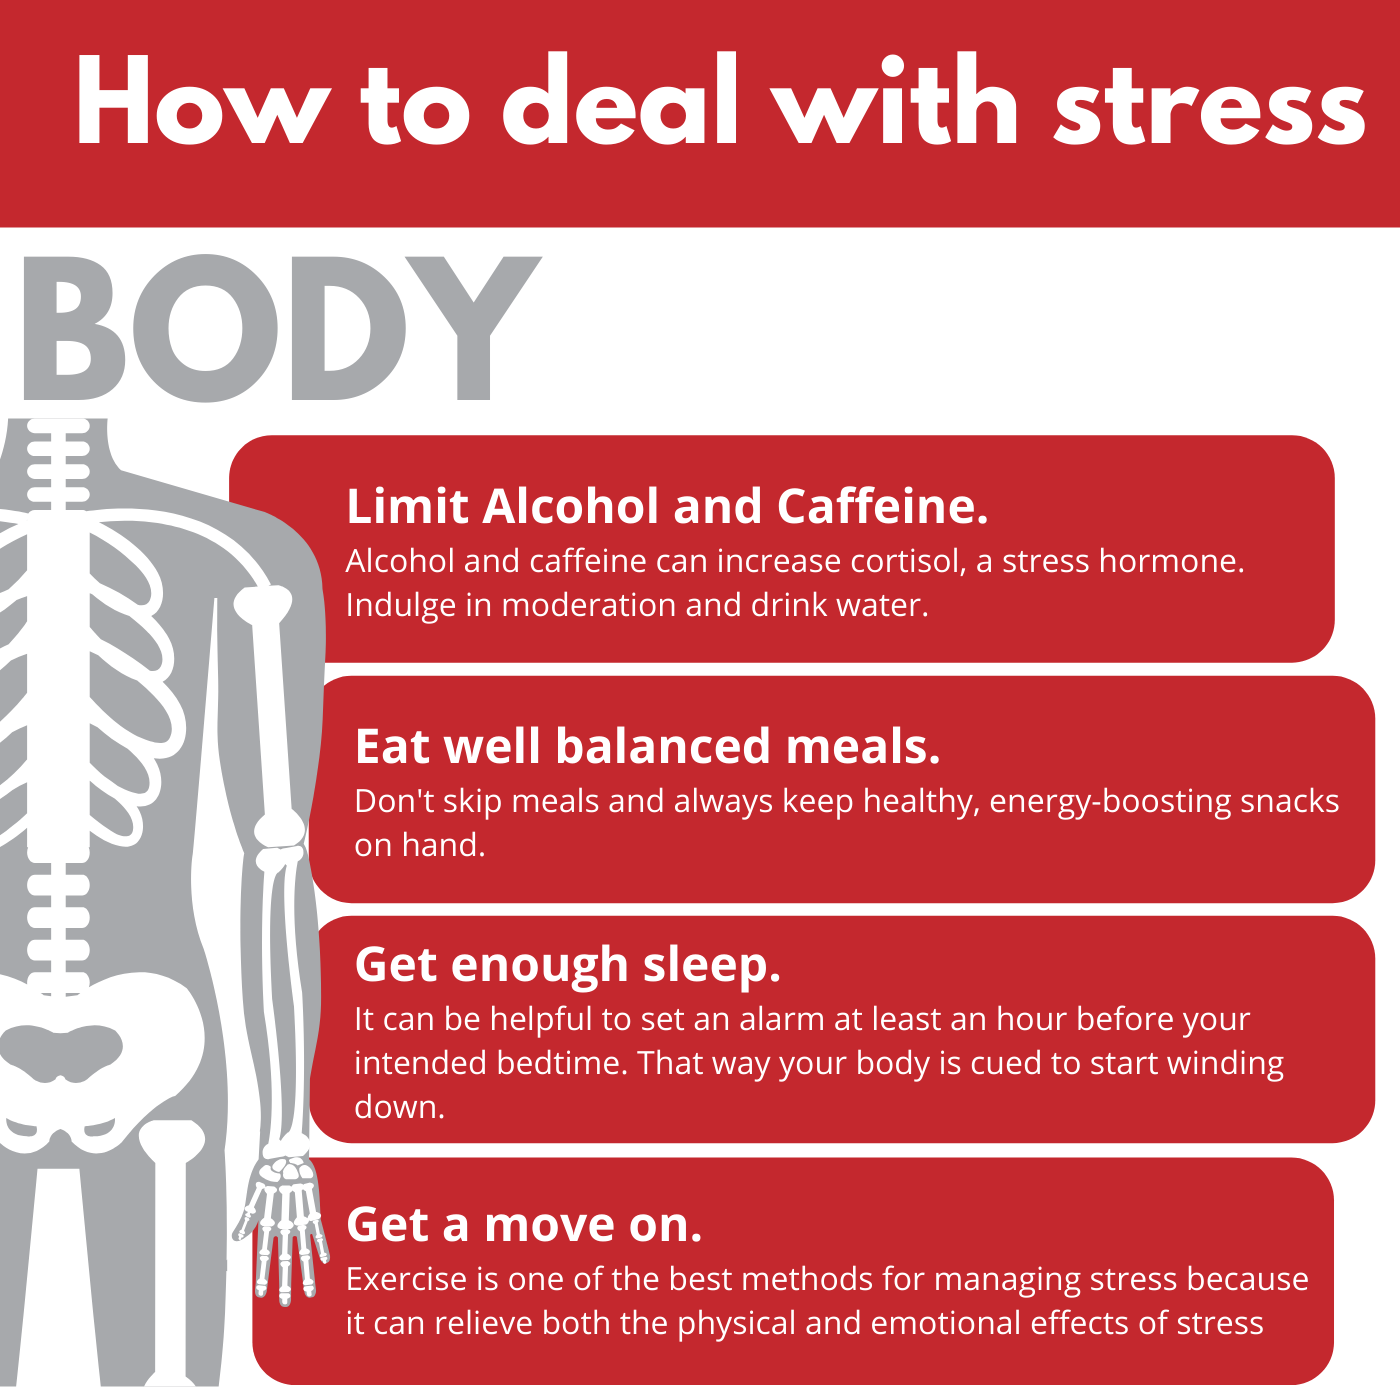 Limit Alcohol and Caffeine, Eat well balances meals, Get enough sleep, Exercise.